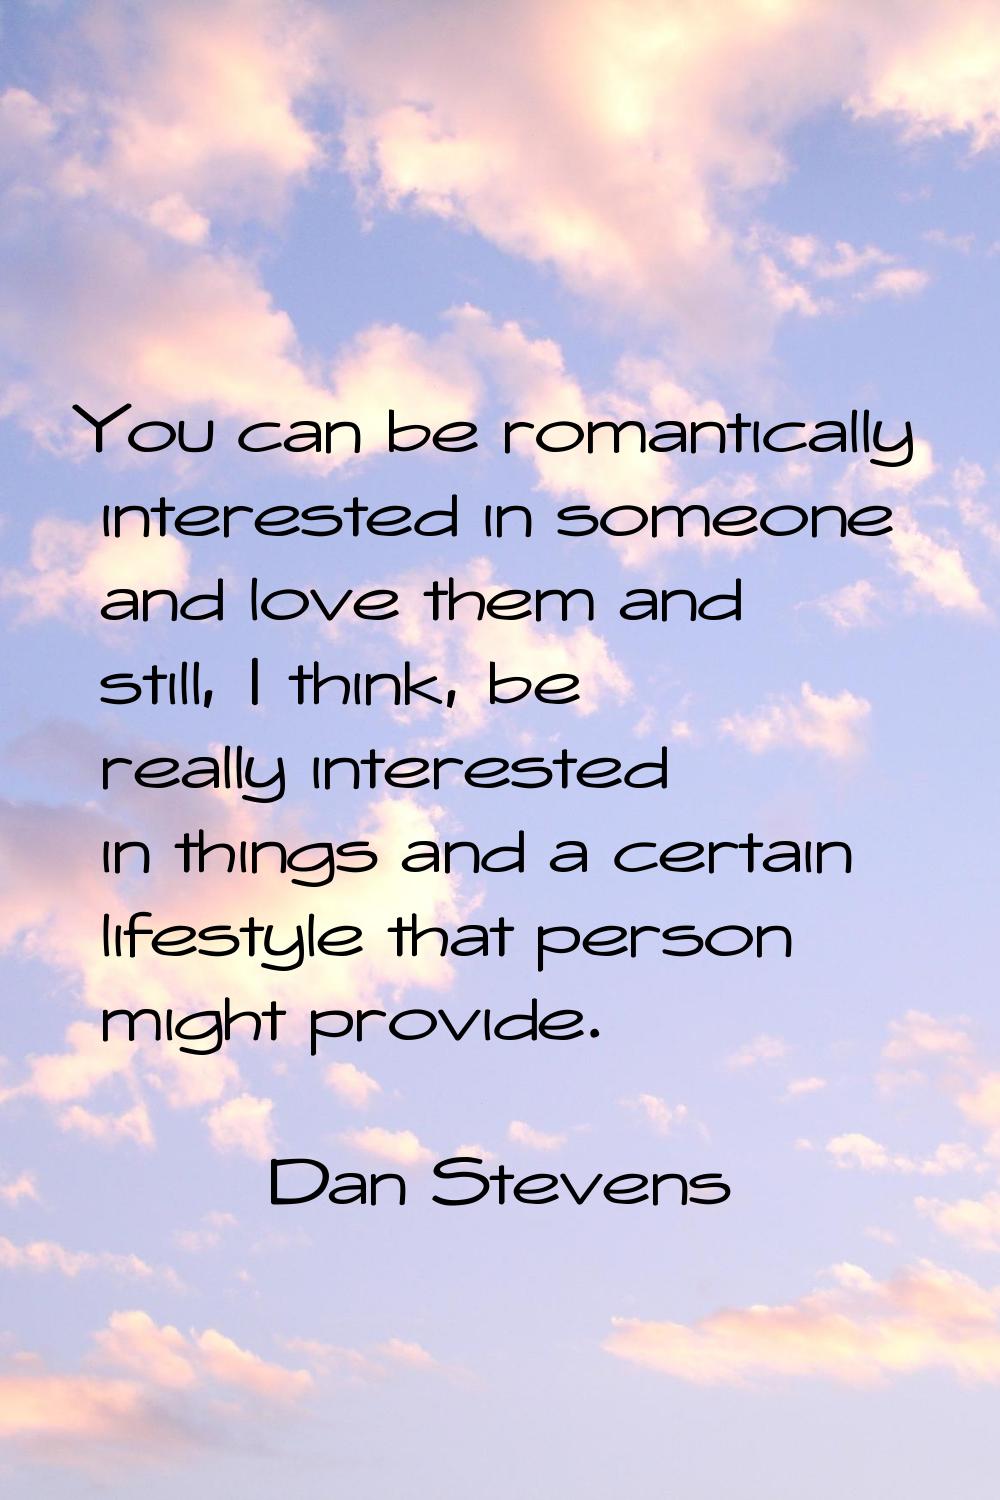 You can be romantically interested in someone and love them and still, I think, be really intereste